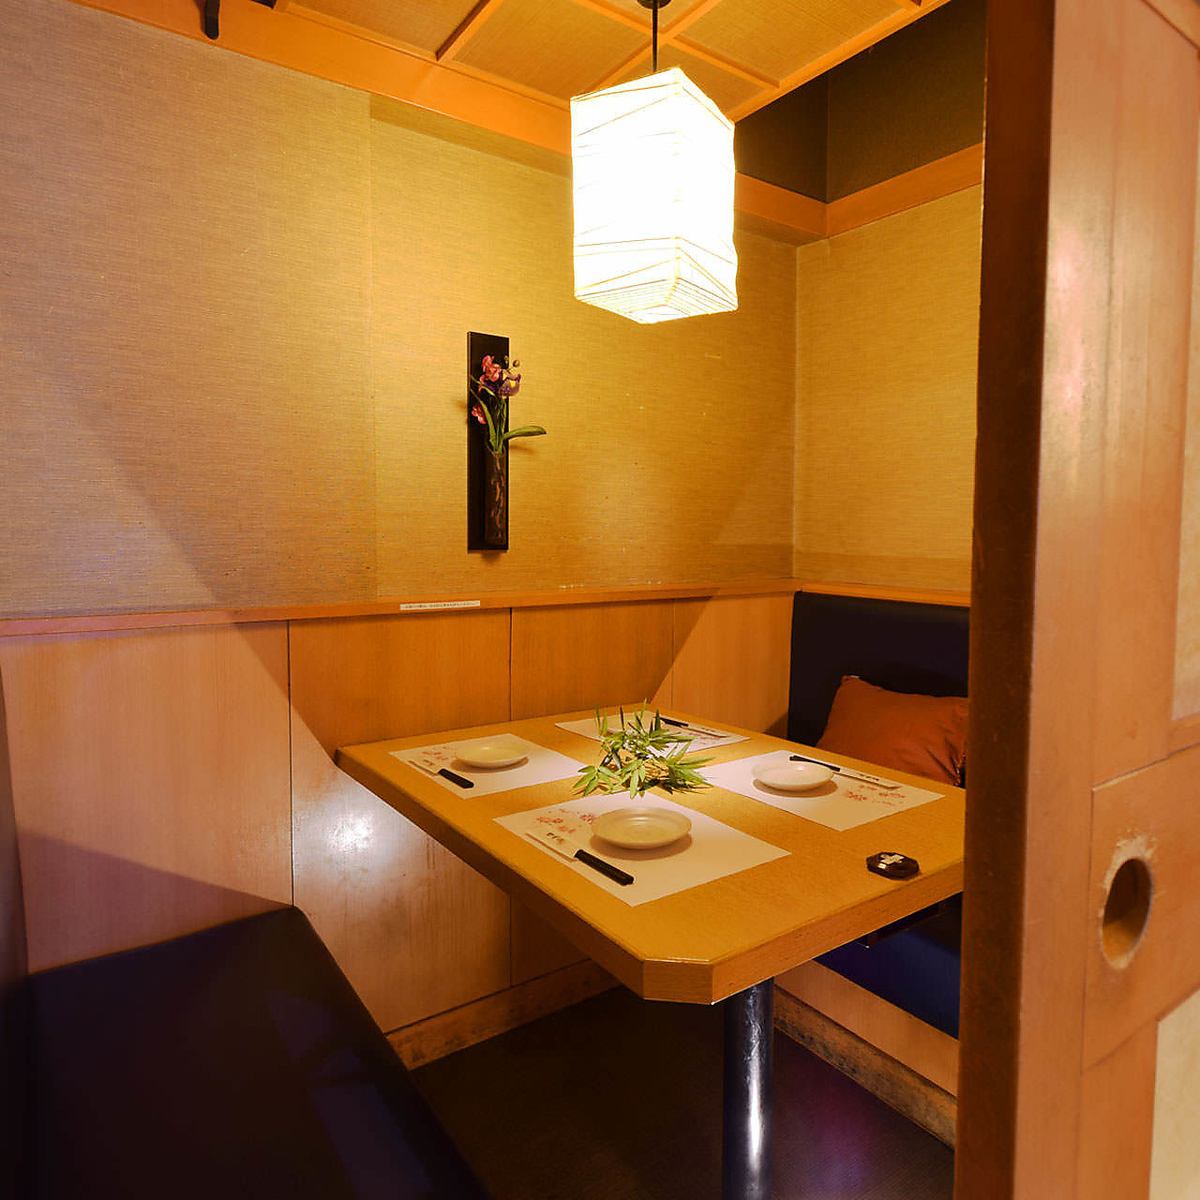 We also have completely private rooms available! Please spend your time relaxing♪